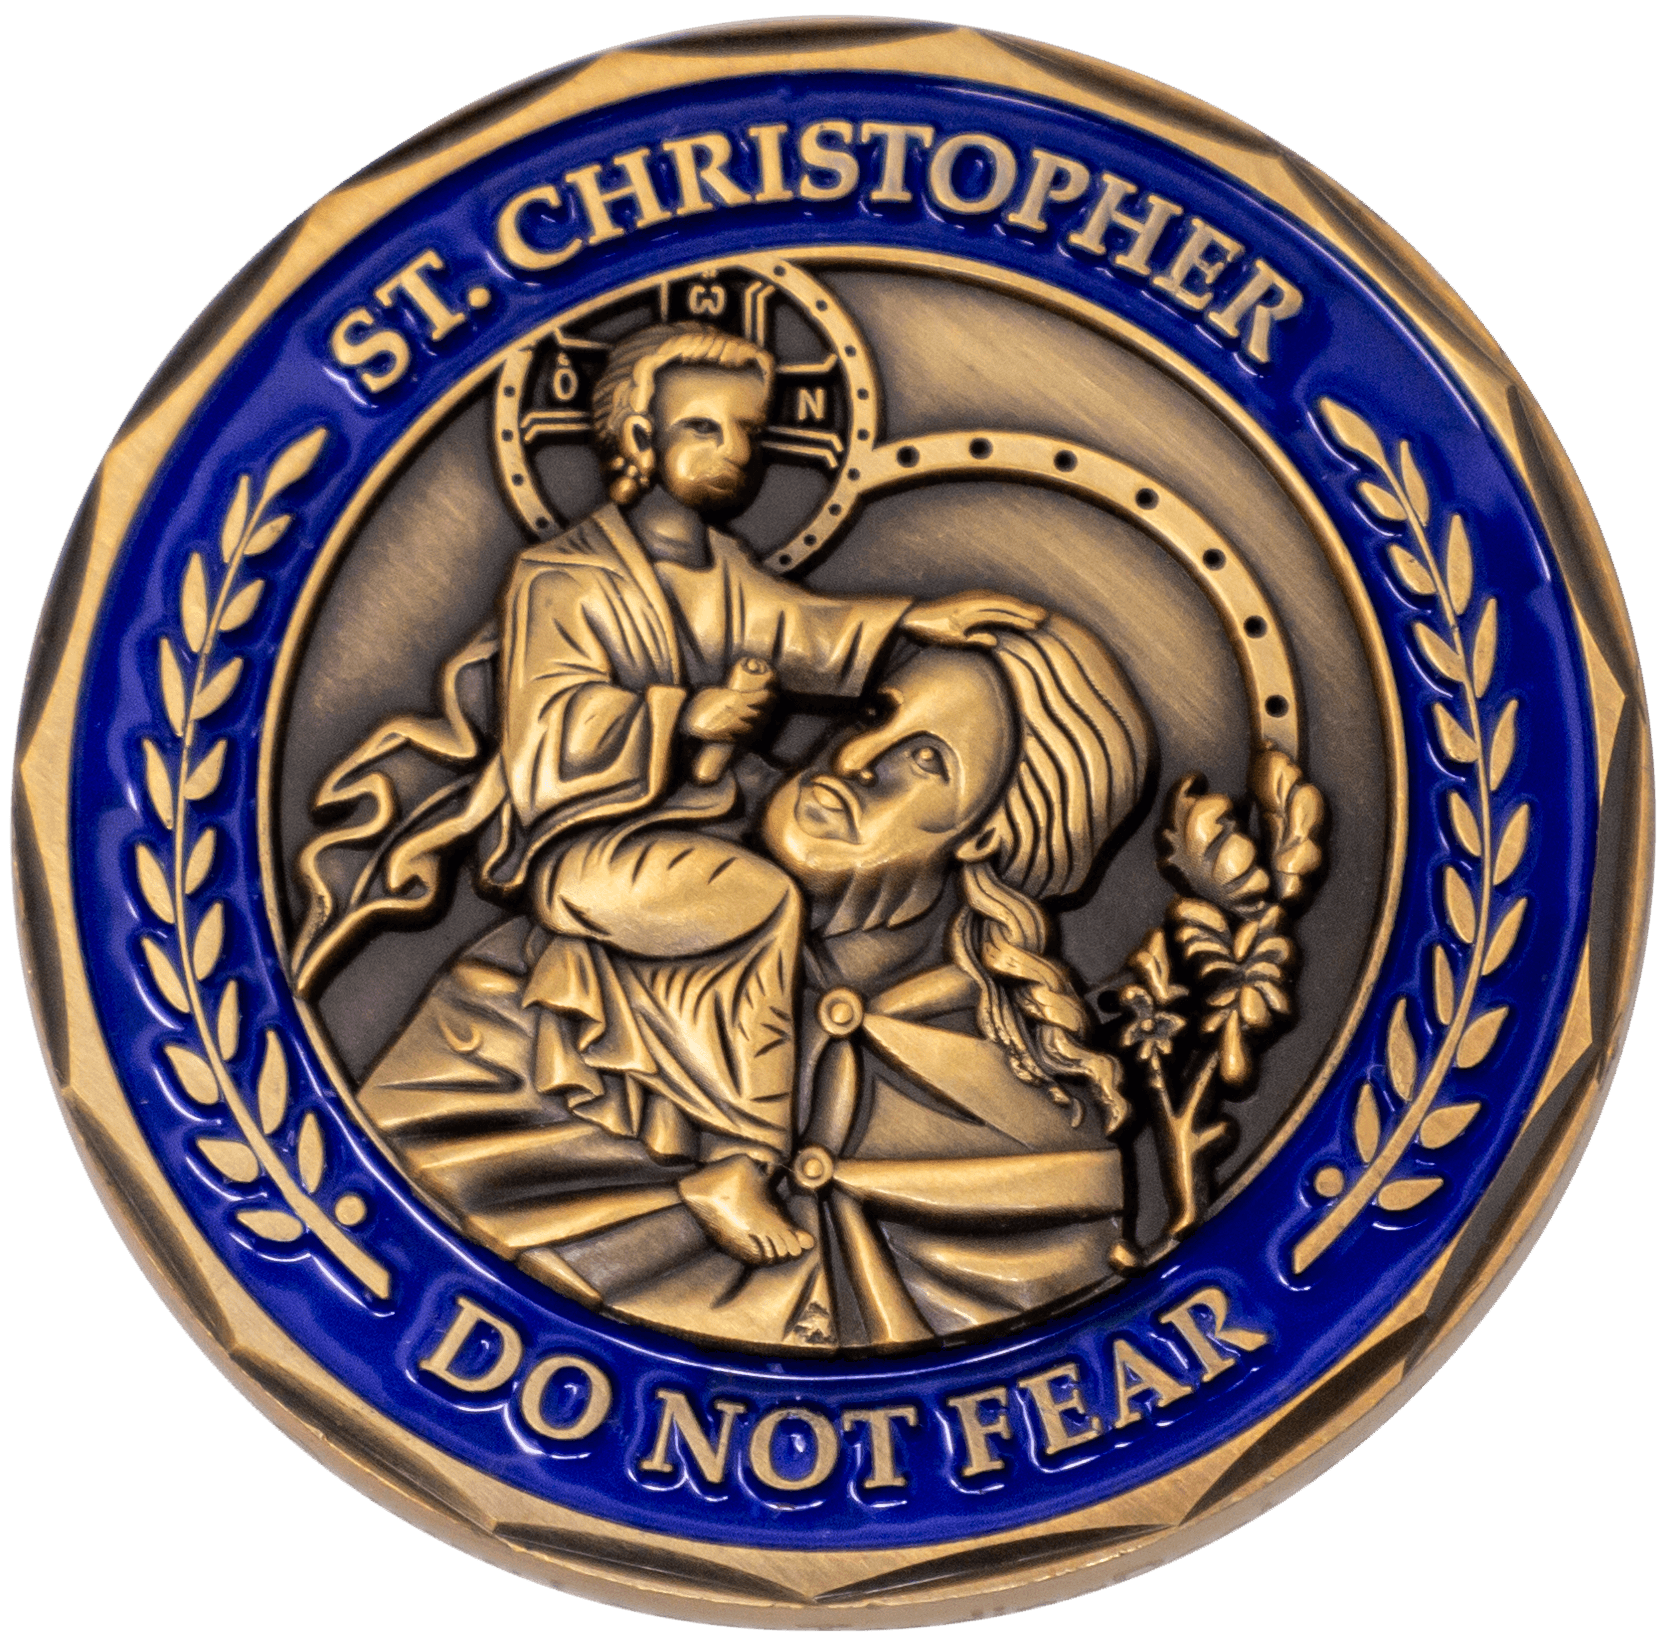 Saint Christopher Antique Gold Plated Collectible Challenge Coin/Token